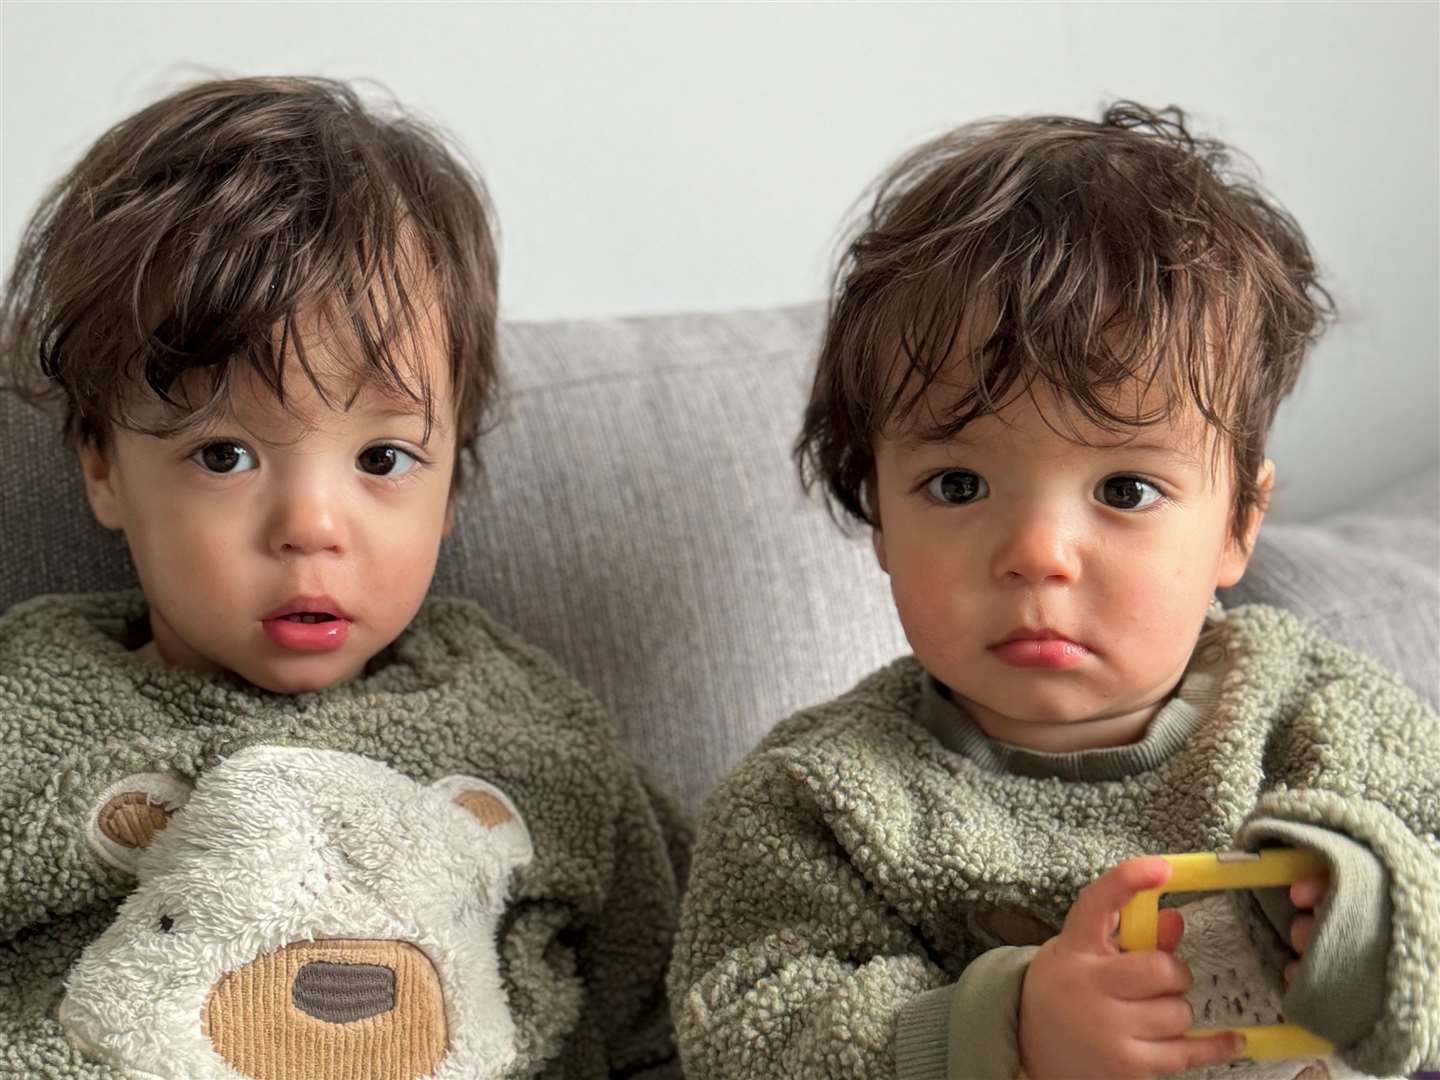 Twins Artemis and Perseus, now 18 months old. Picture: SWNS